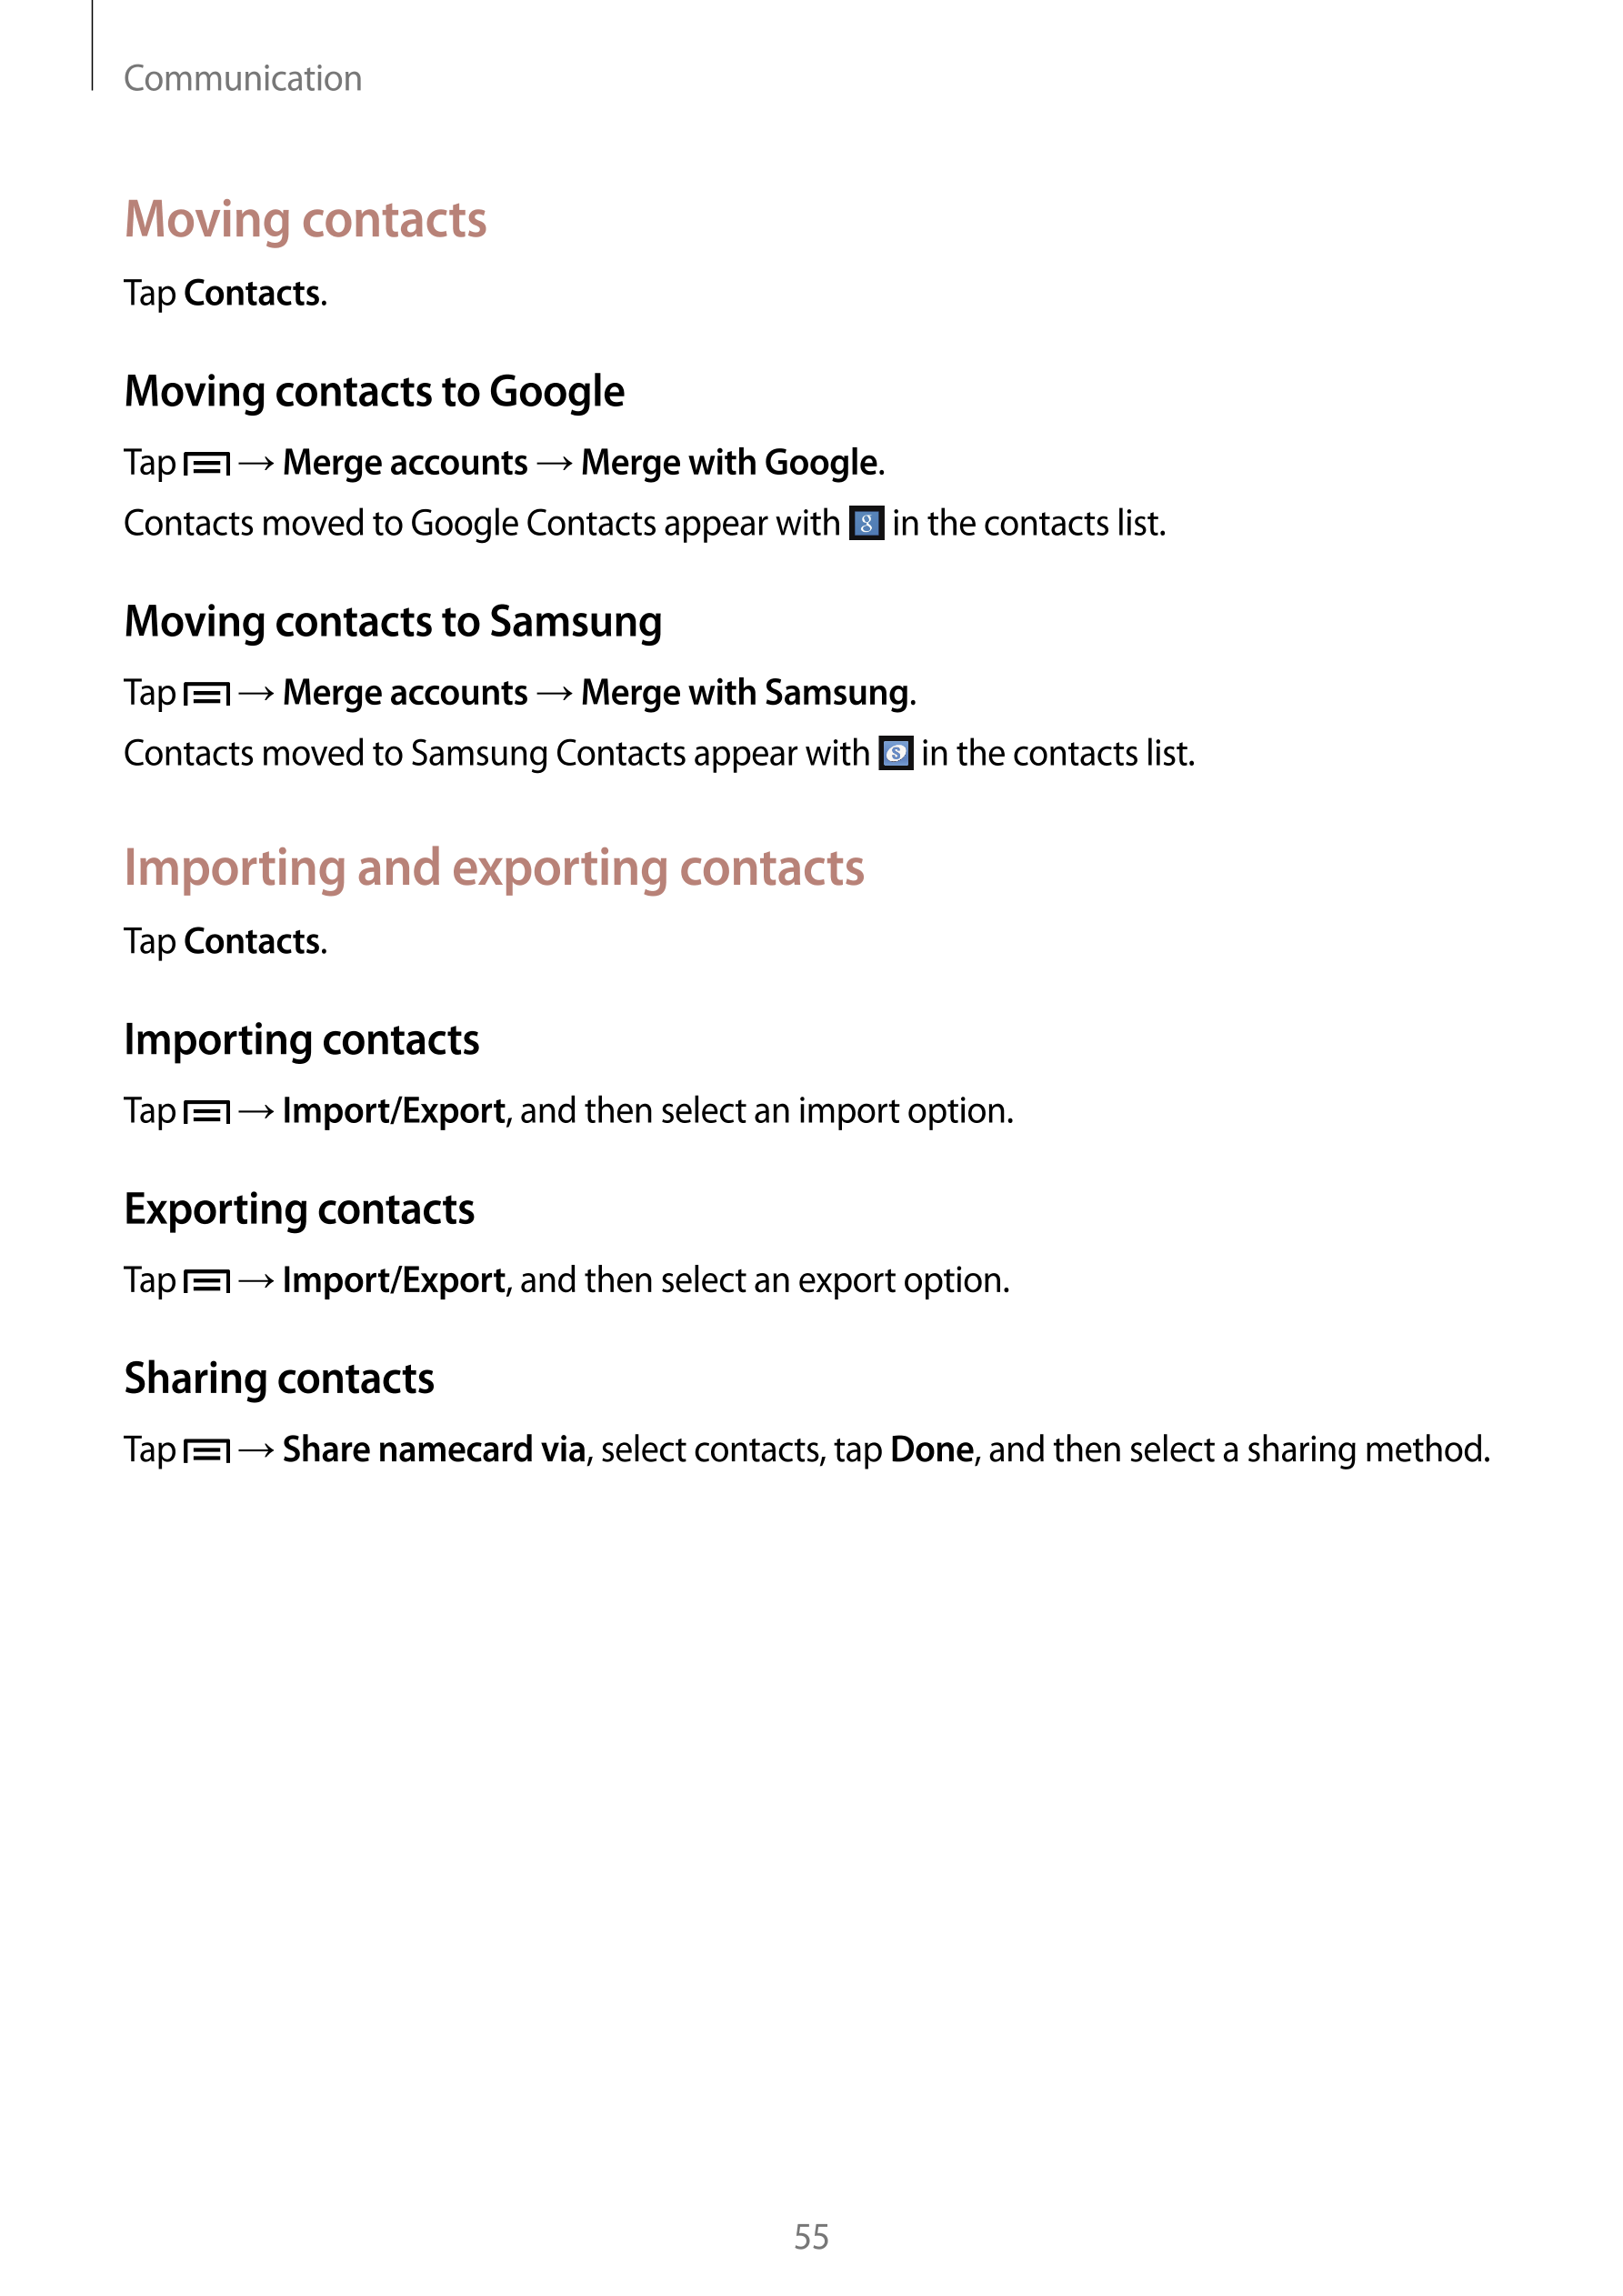 Communication
Moving contacts
Tap  Contacts.
Moving contacts to Google
Tap    →  Merge accounts  →  Merge with Google.
Contacts 